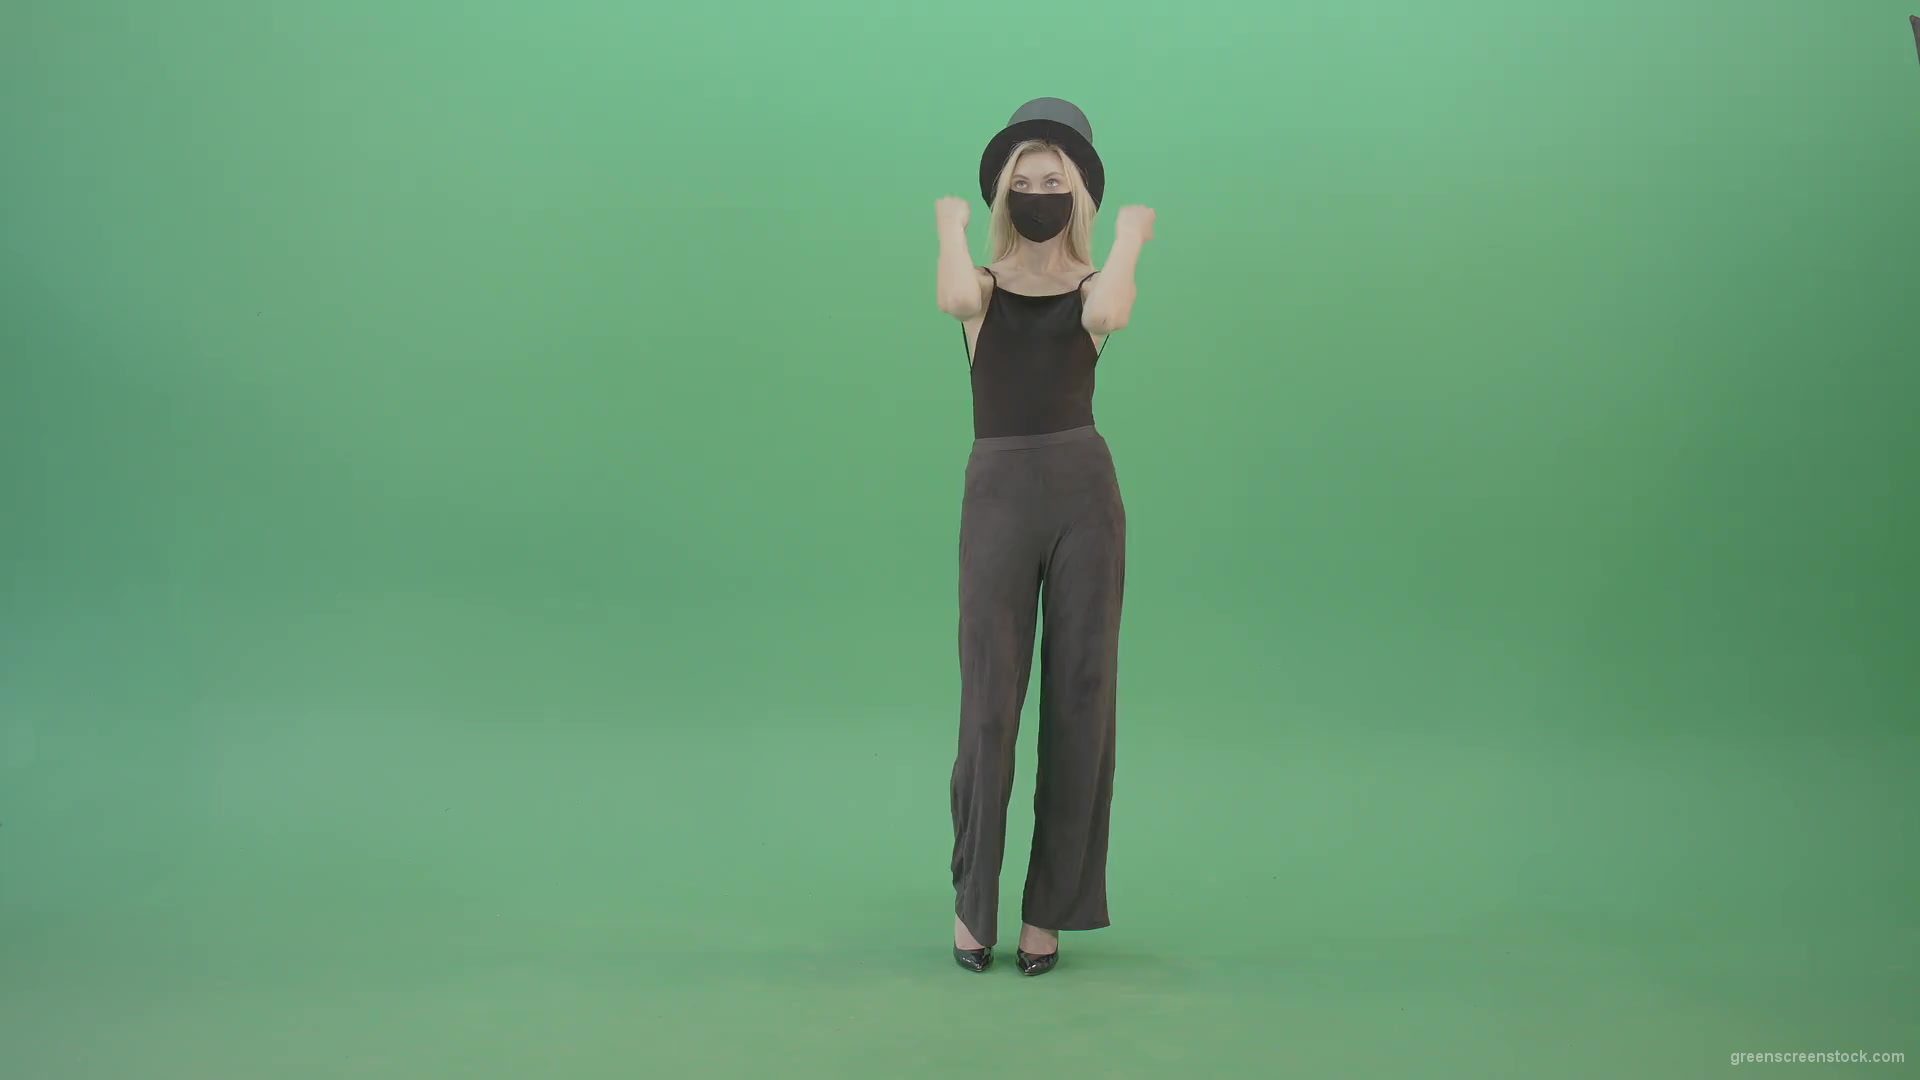 Covid-Mask-Girl-in-Black-cylinder-Hat-dancing-in-front-and-back-side-view-isolated-on-green-screen-Video-Footage-1920_001 Green Screen Stock